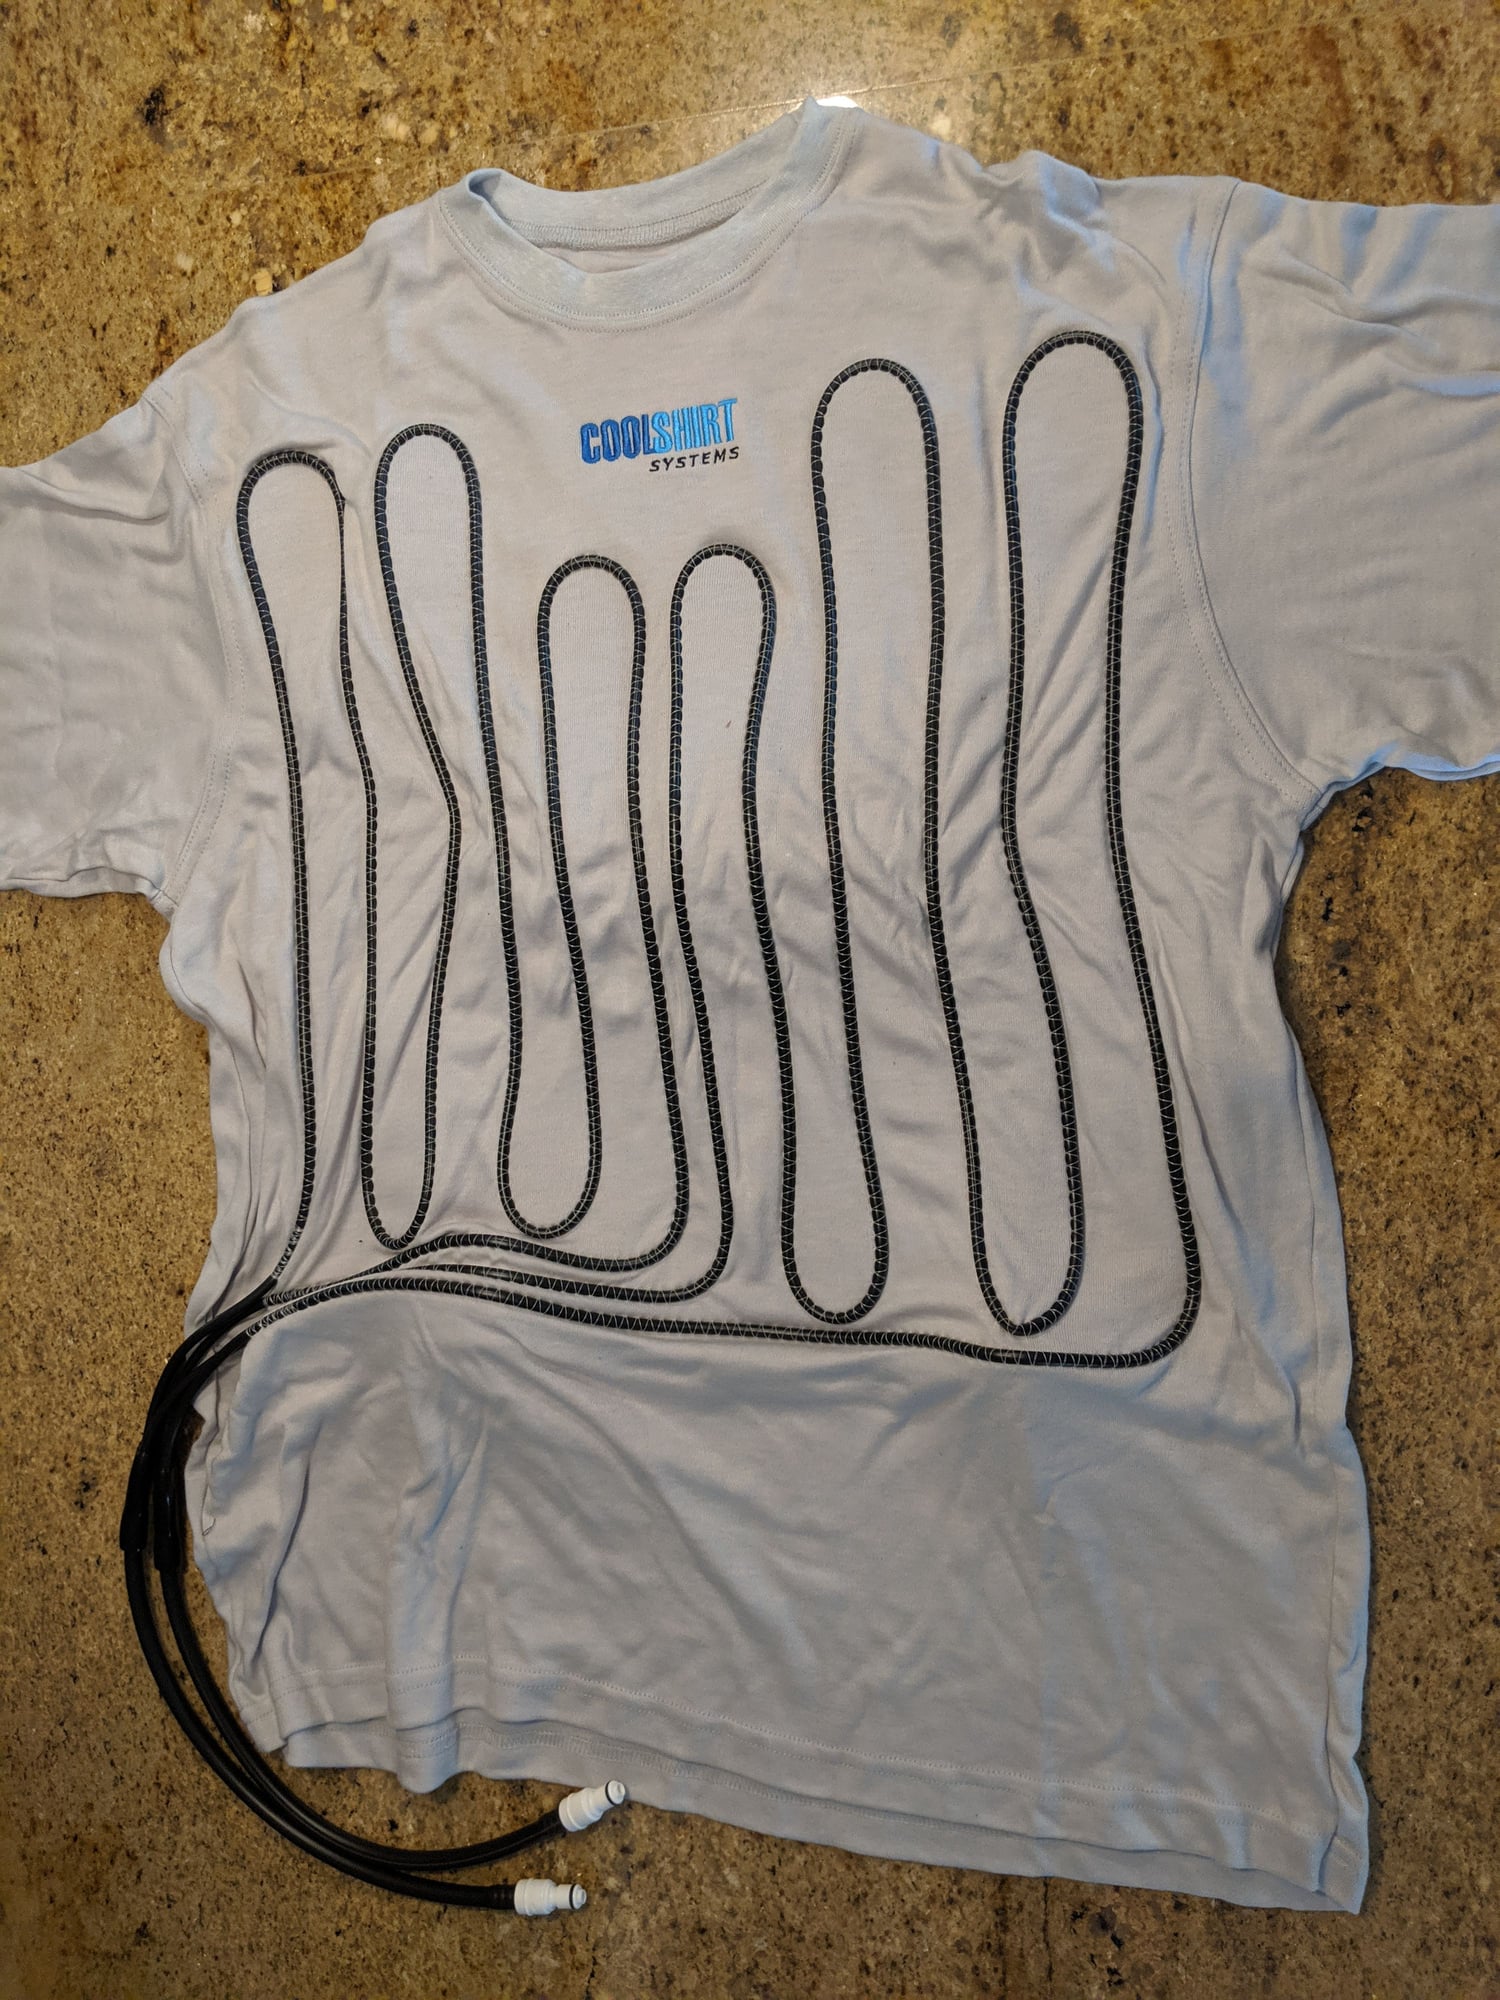 Never worn CoolShirt, Coolshirt Temperature Control Panel and ...